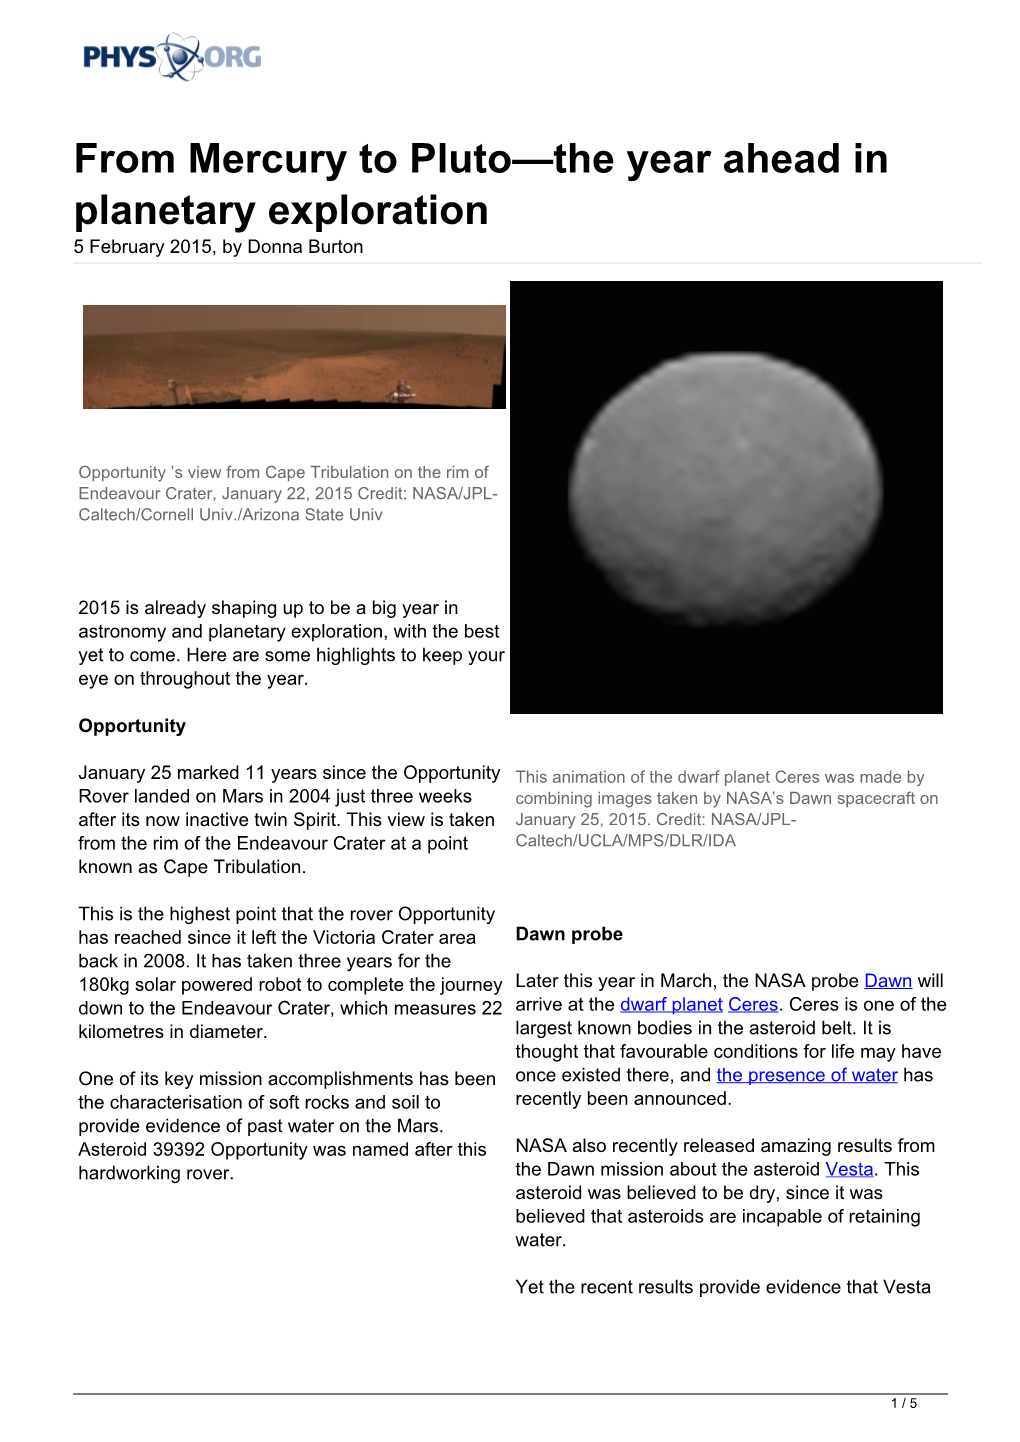 From Mercury to Pluto—The Year Ahead in Planetary Exploration 5 February 2015, by Donna Burton